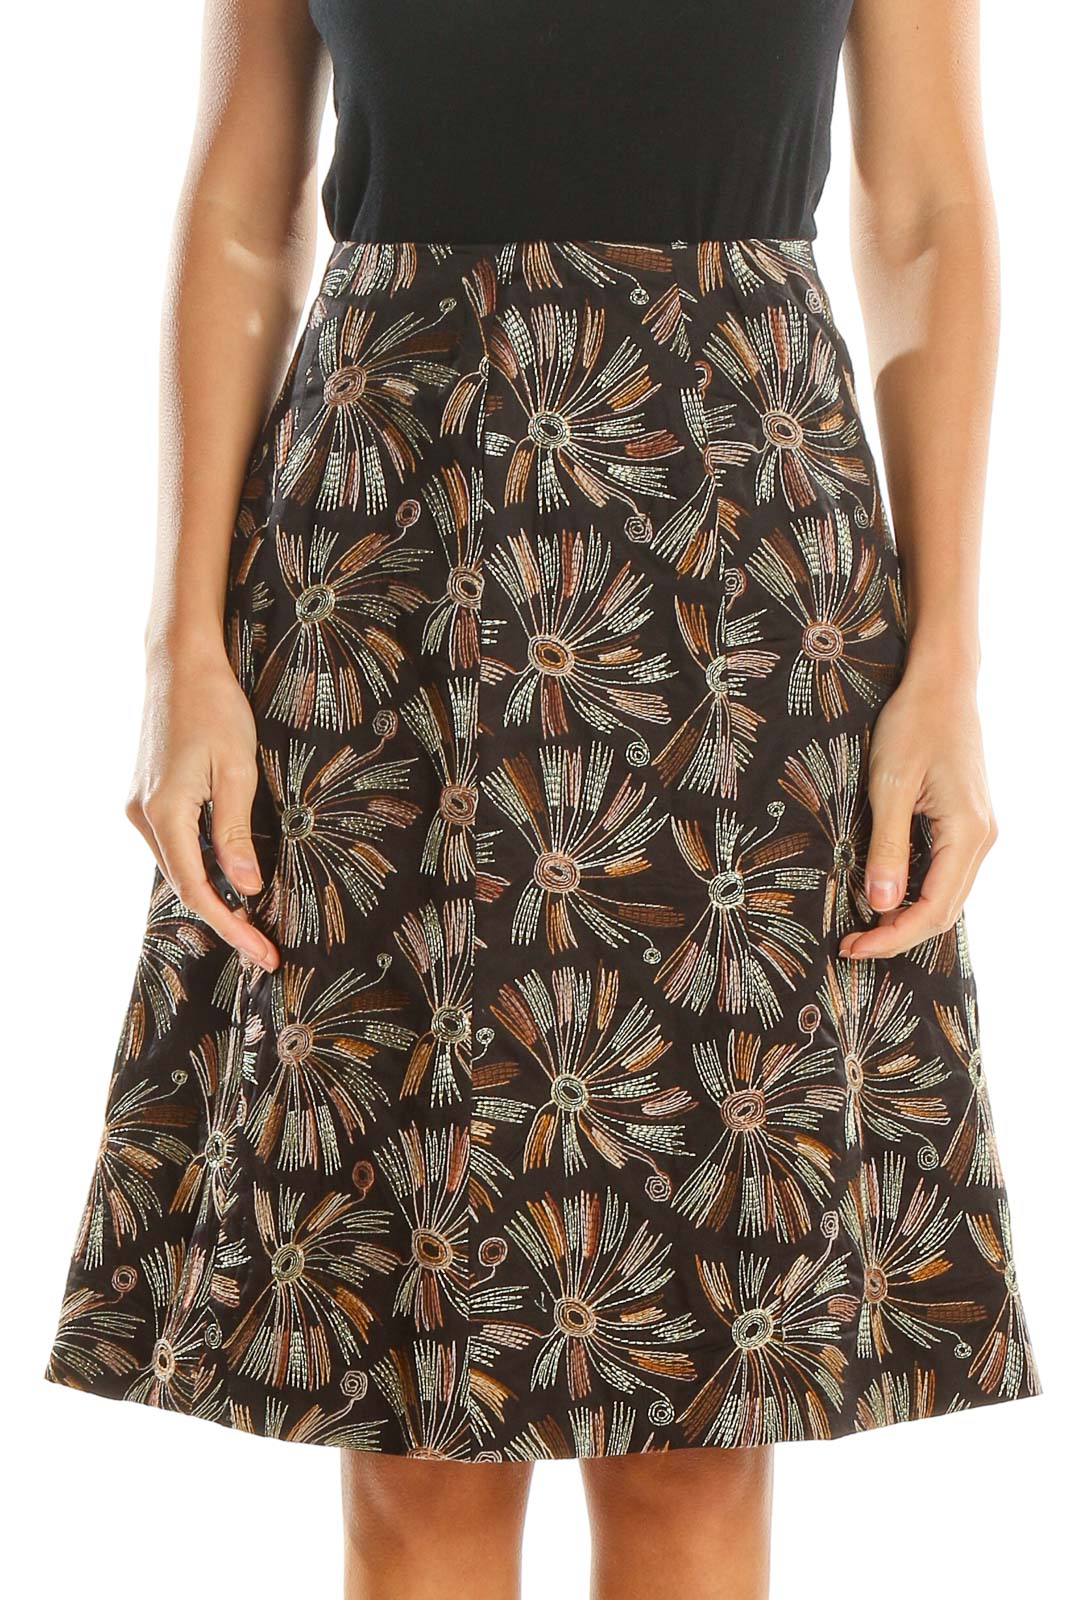 Brown Embroidered Retro A-Line Skirt Front